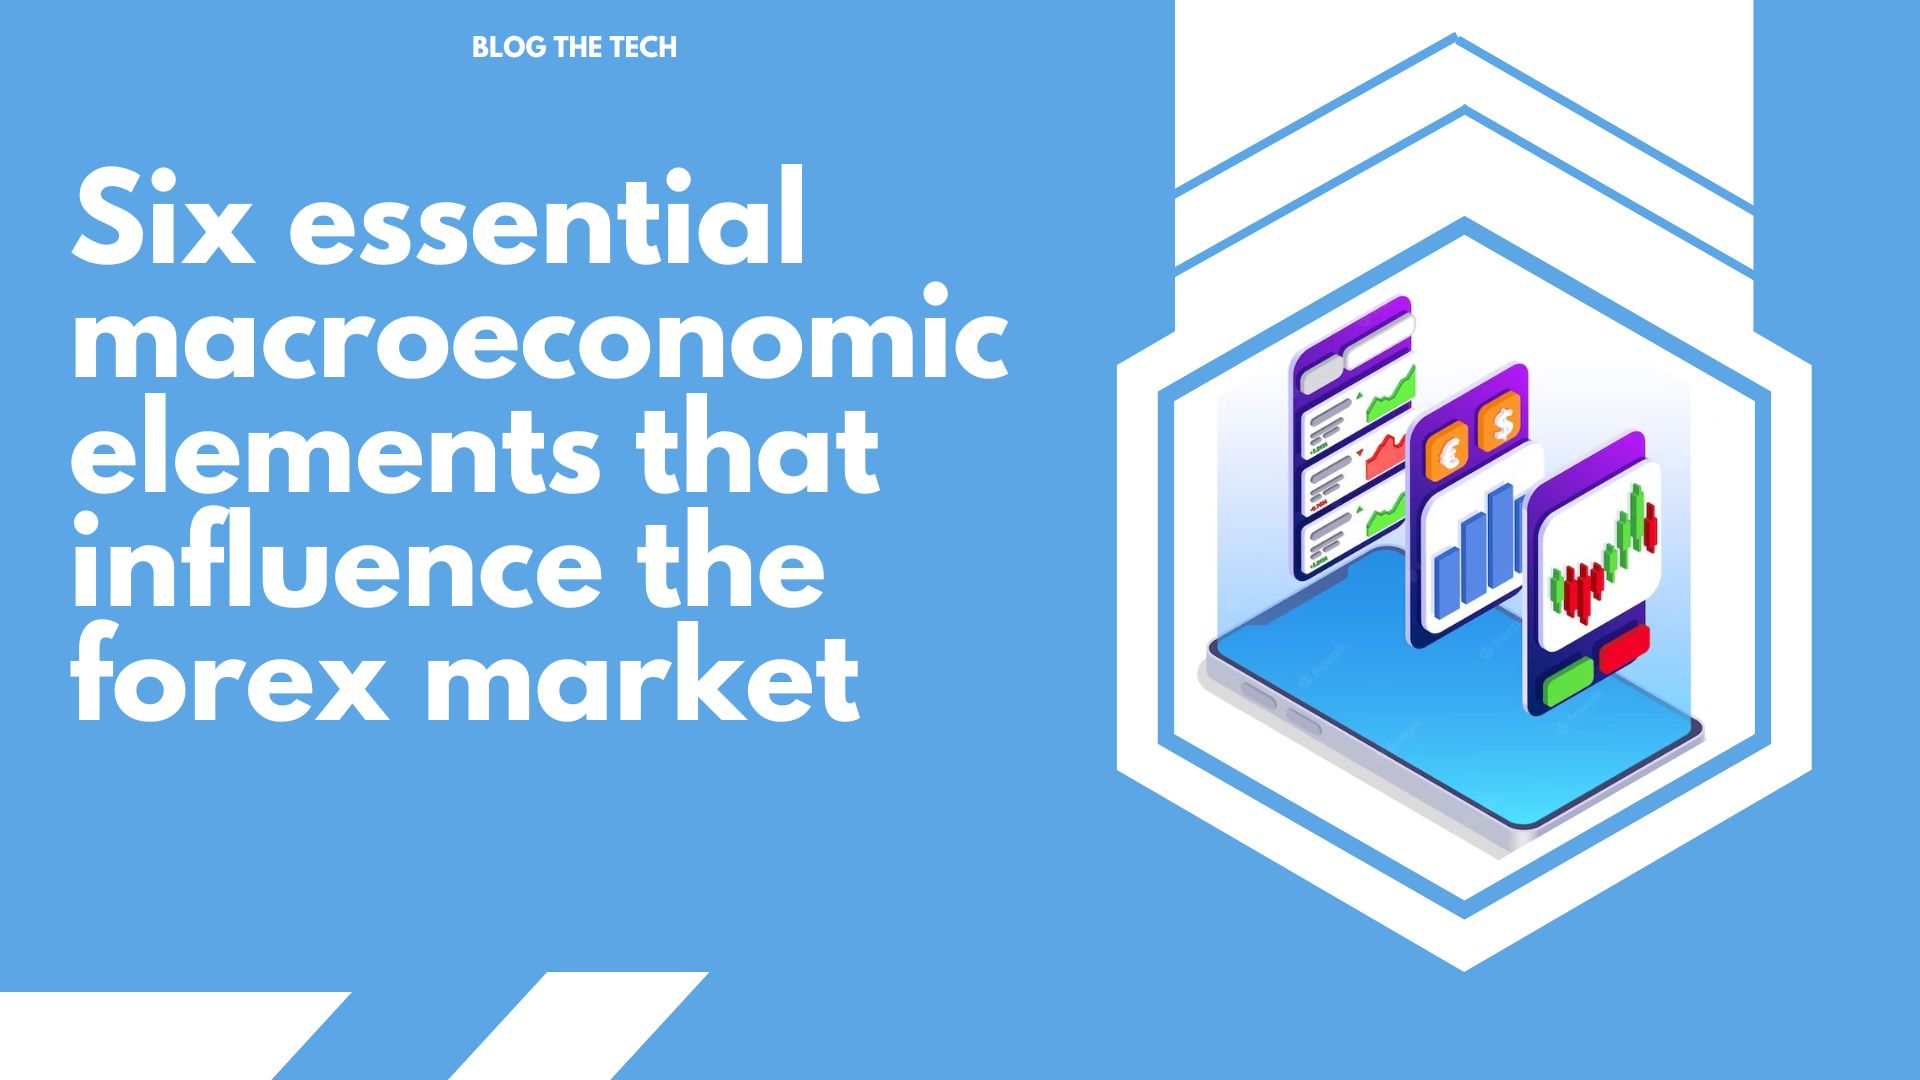 Six essential macroeconomic elements that influence the forex market